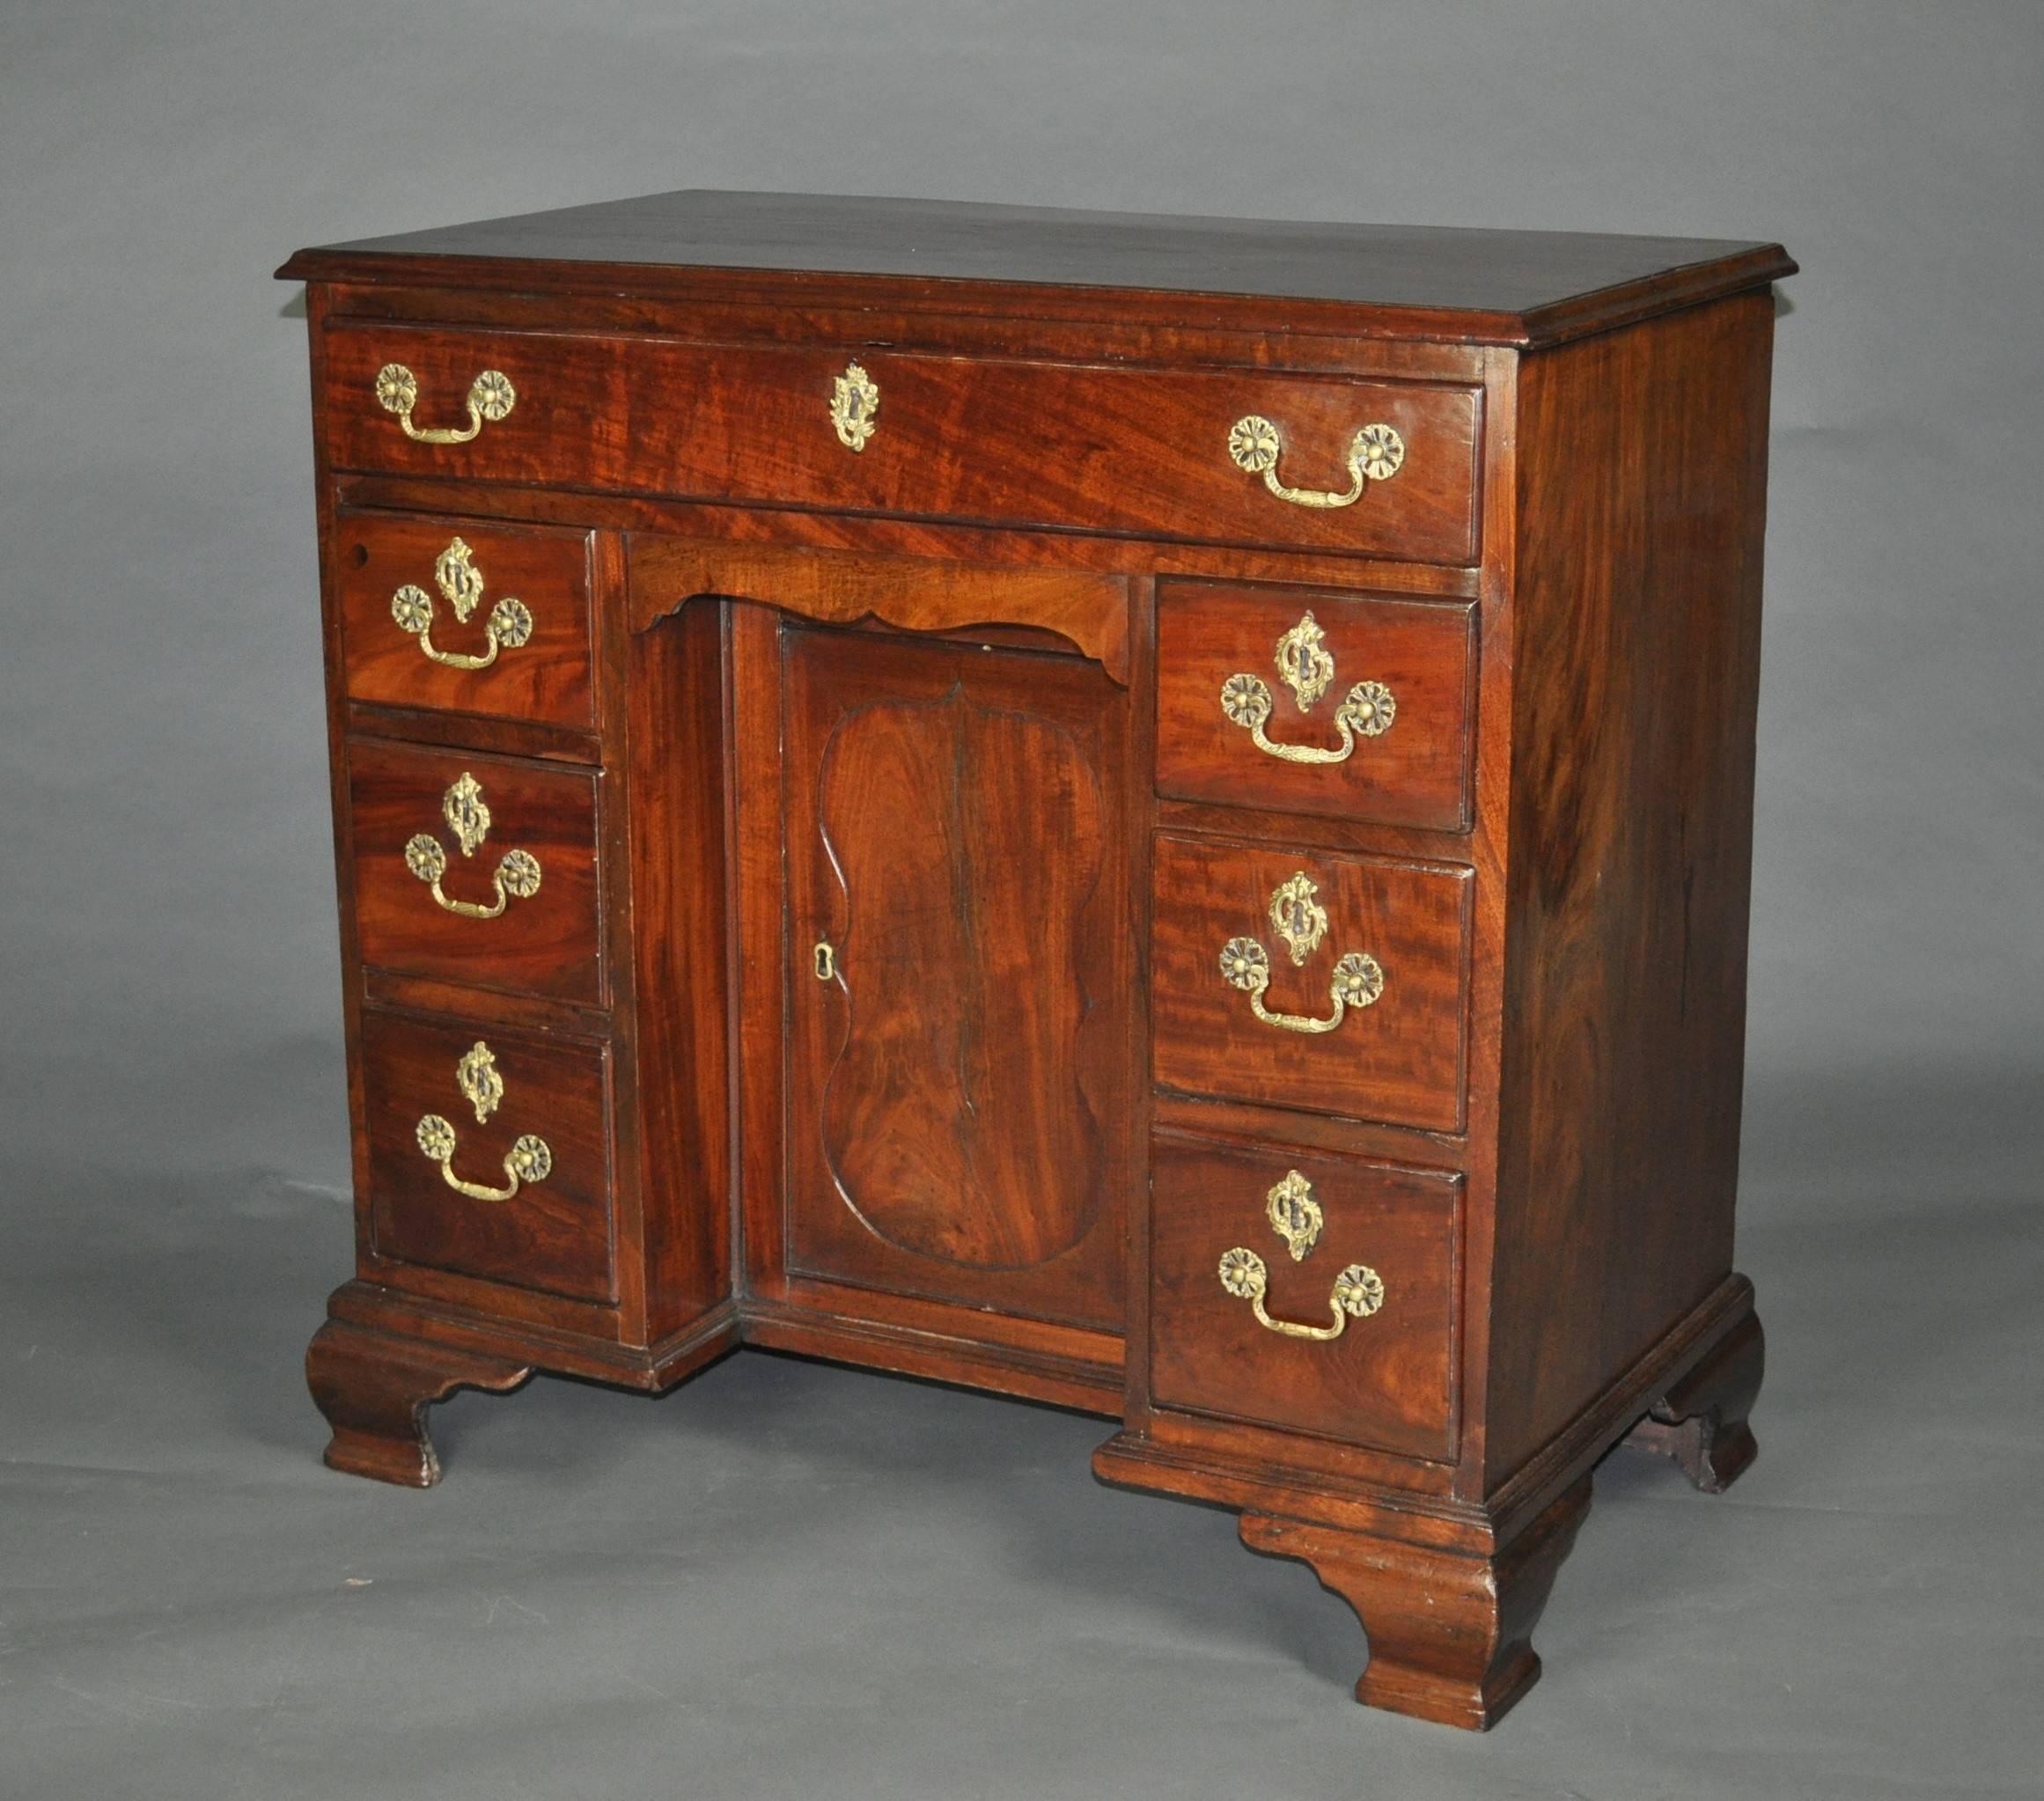 A good George III period mahogany kneehole desk or dressing table, the top with moulded edge above one long drawers and three small drawers on each side of a recessed central cupboard and hidden apron drawer. Raised on ogee bracket feet. The central